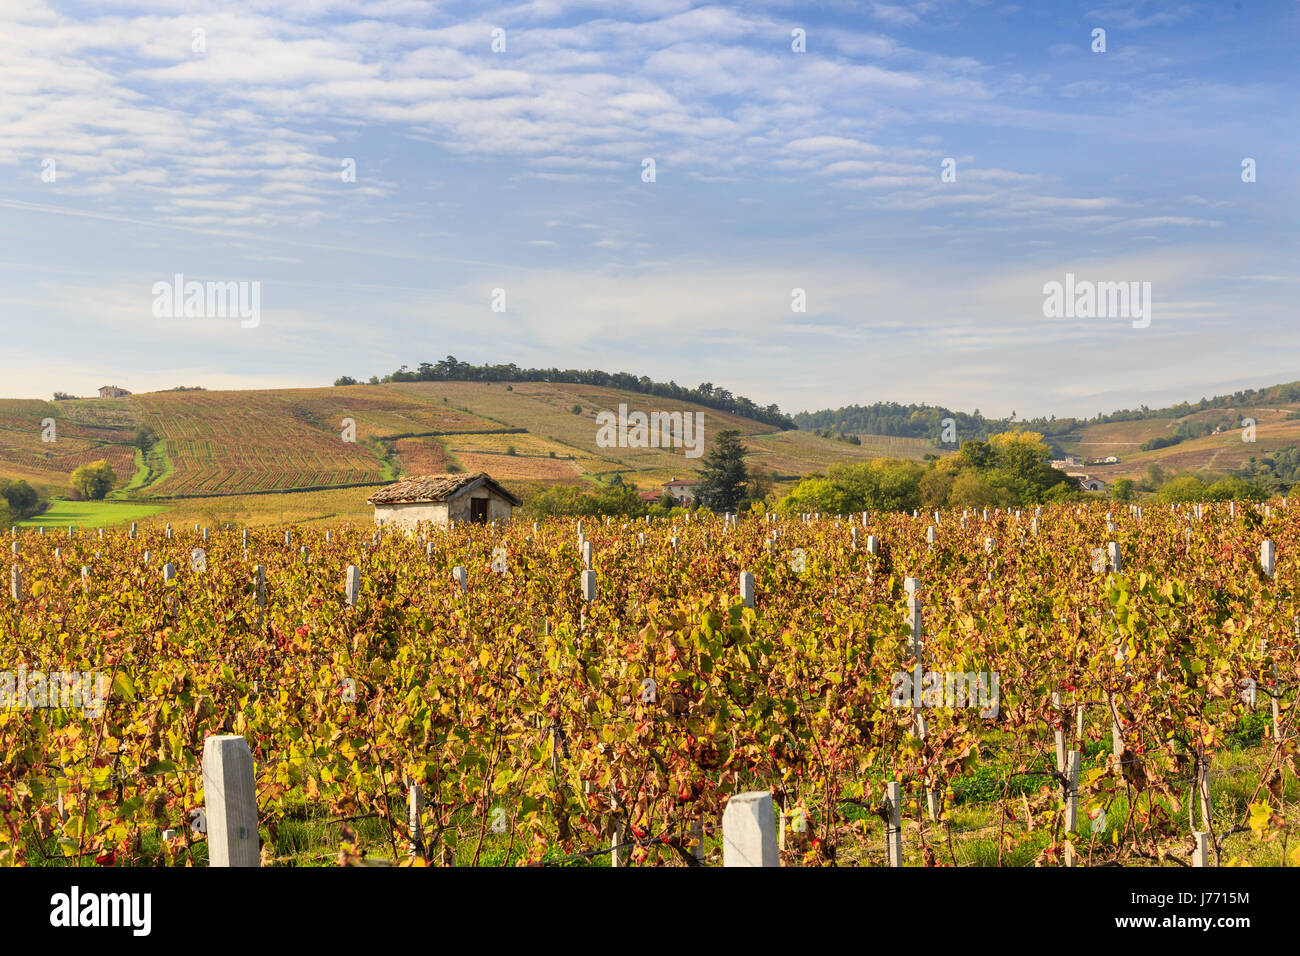 France, Saone et Loire, Beaujolais region, Romaneche Thorins, the vineyards of the Moulin a Vent in autumn Stock Photo